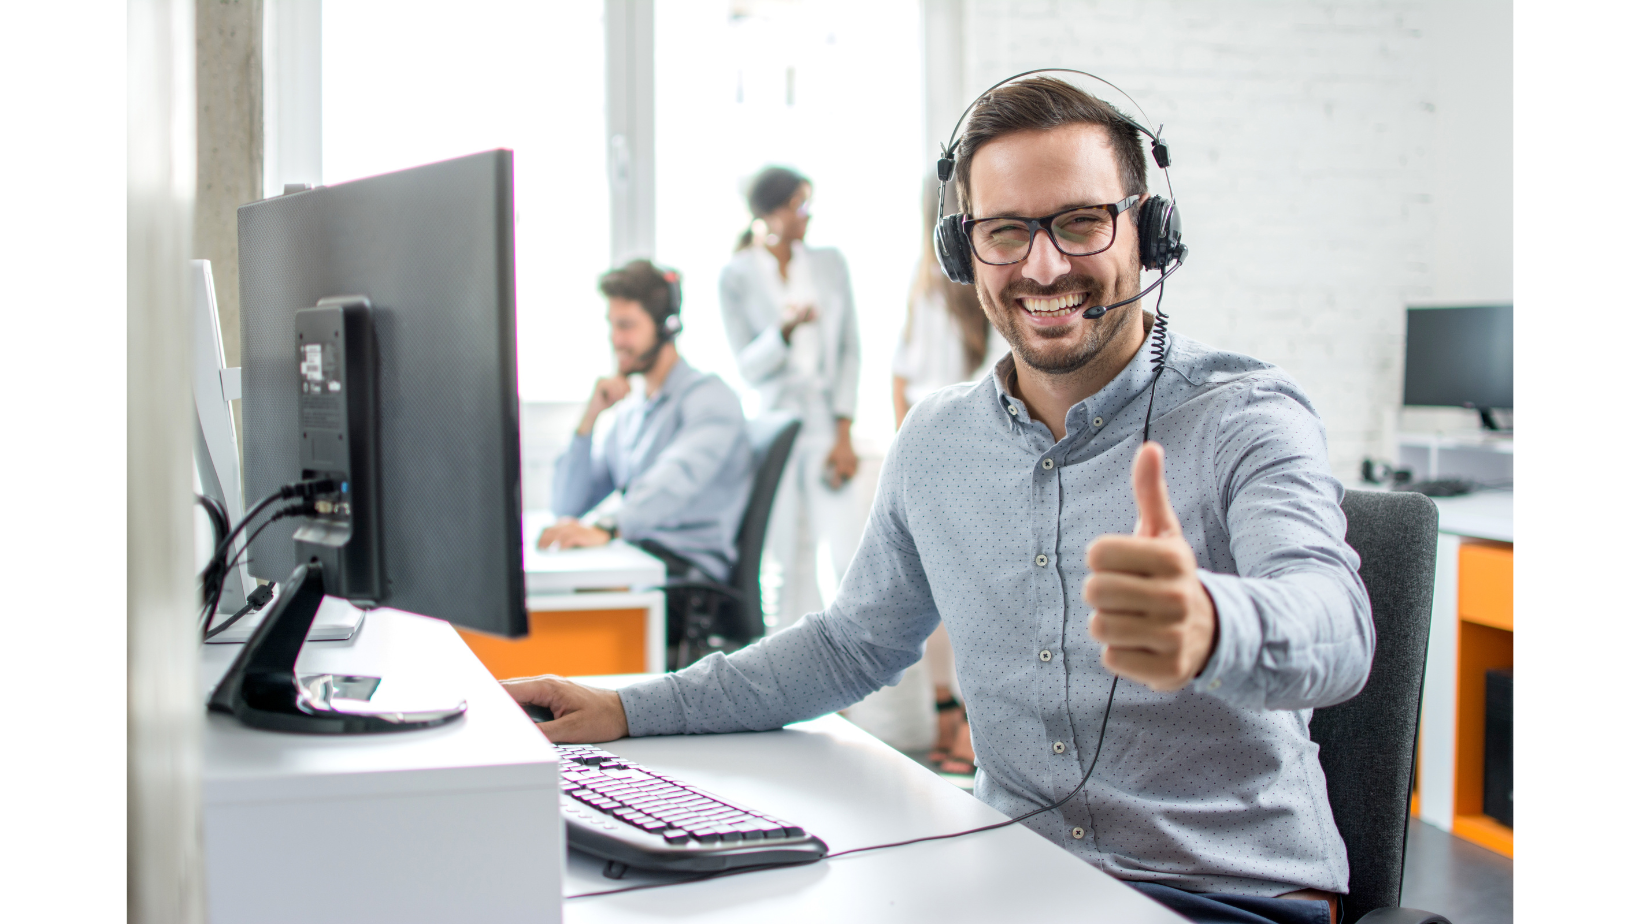 a man wearing headphones and giving a thumbs up